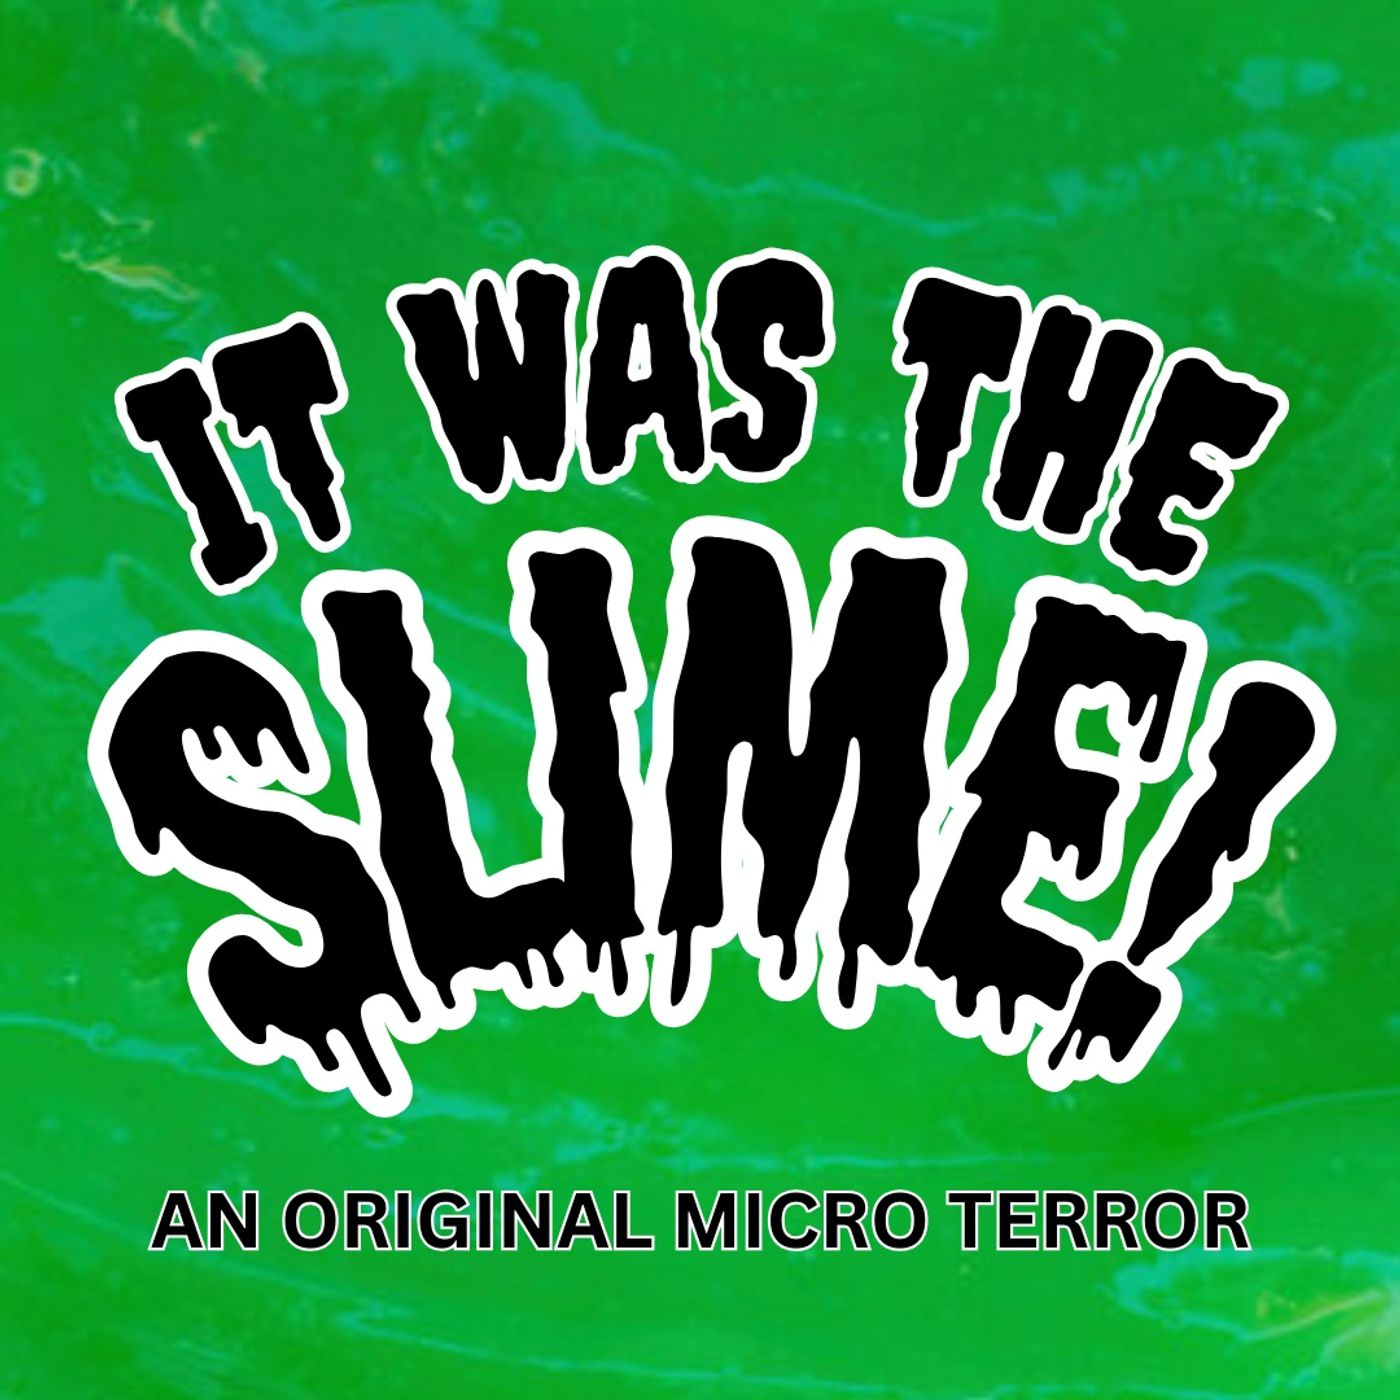 “IT WAS THE SLIME!” by Scott Donnelly #MicroTerrors